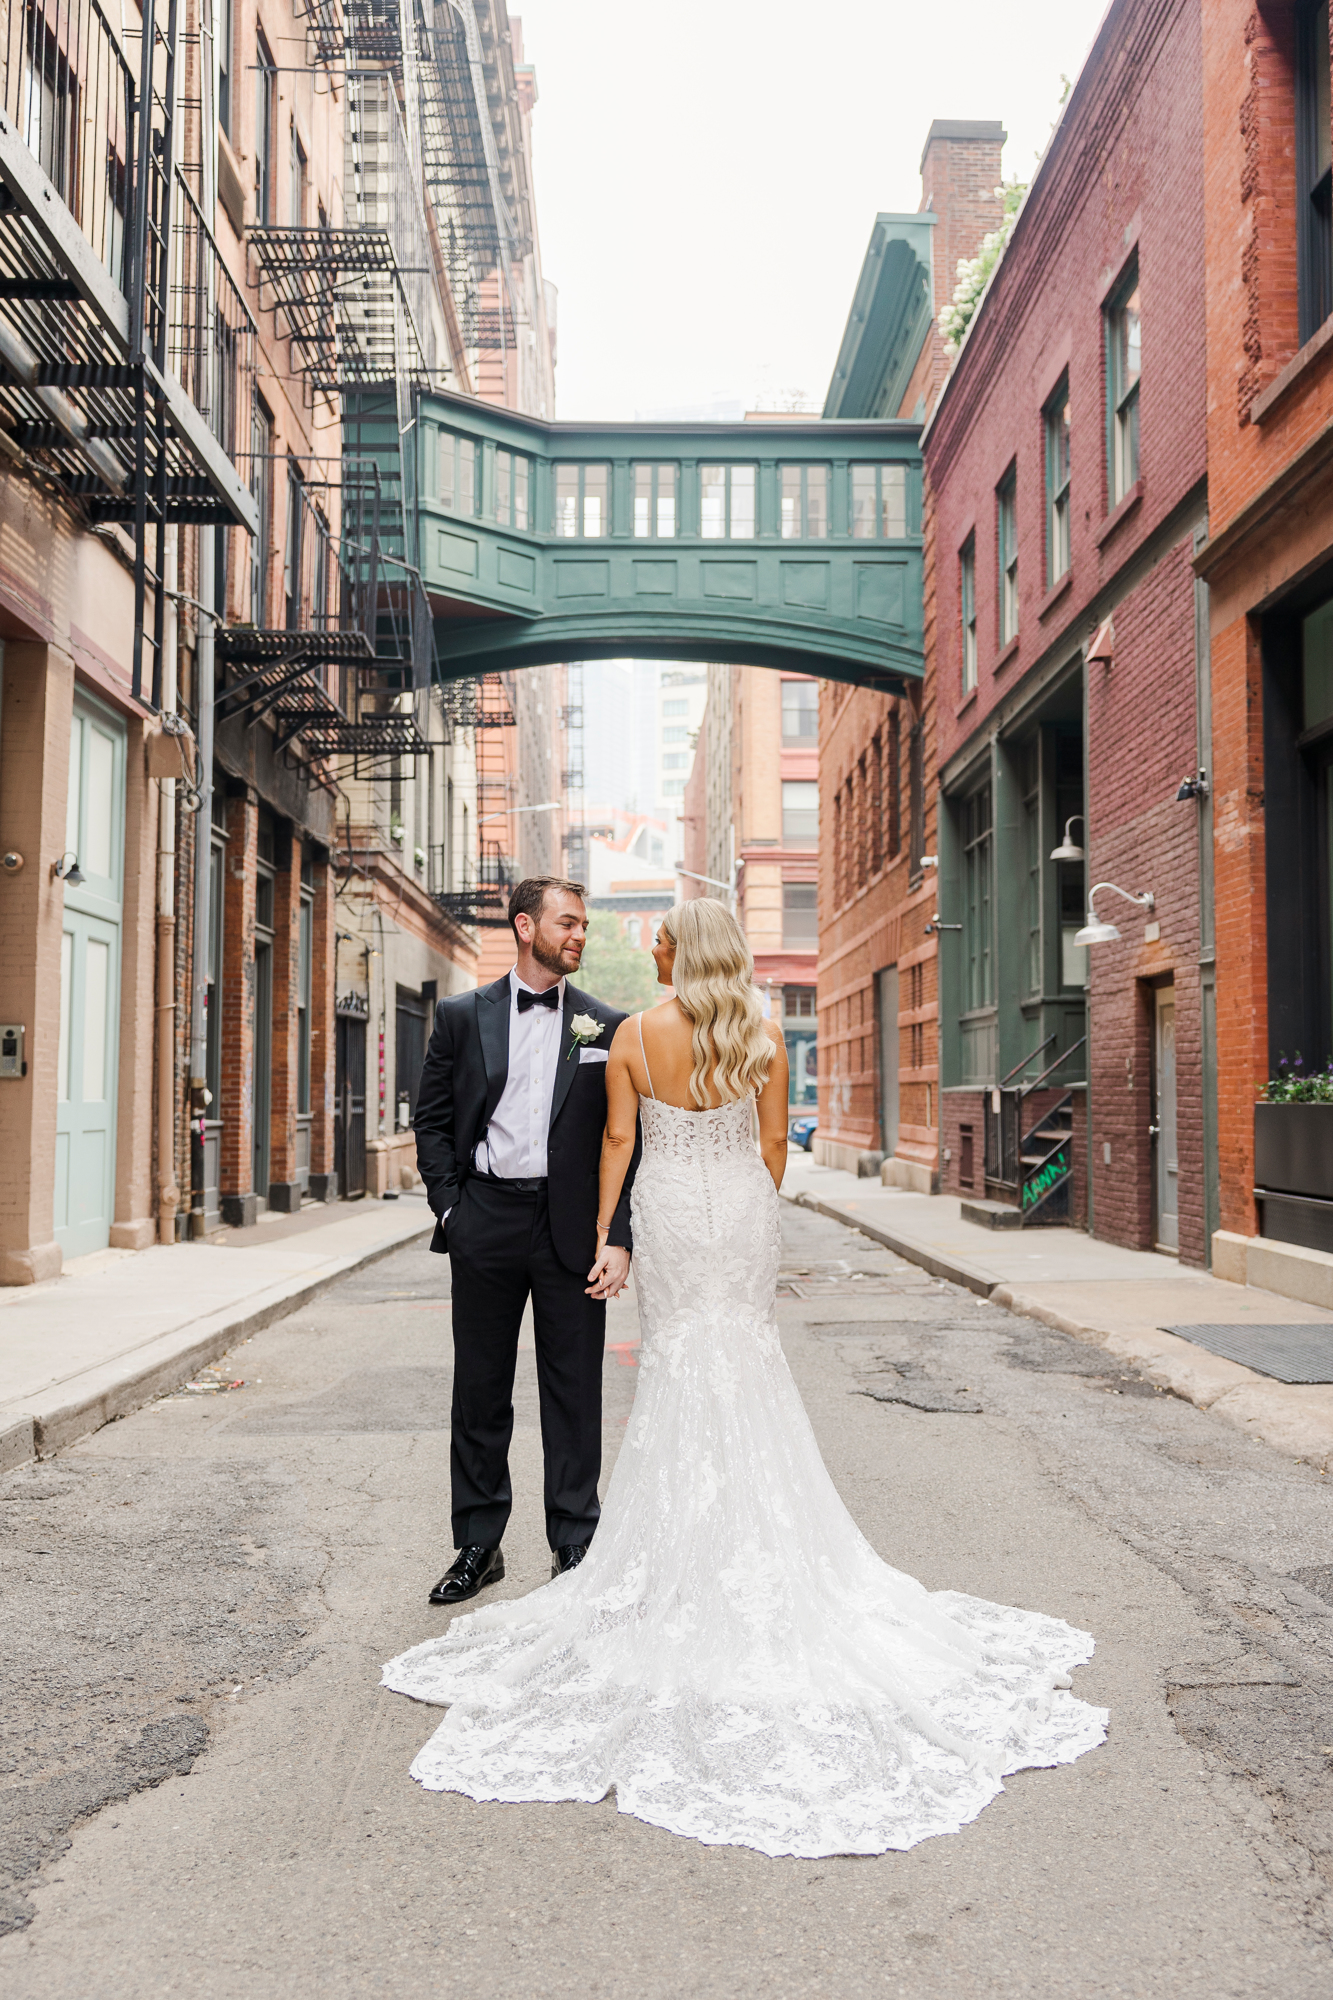 Personal Photo Gallery of Tribeca Rooftop Wedding